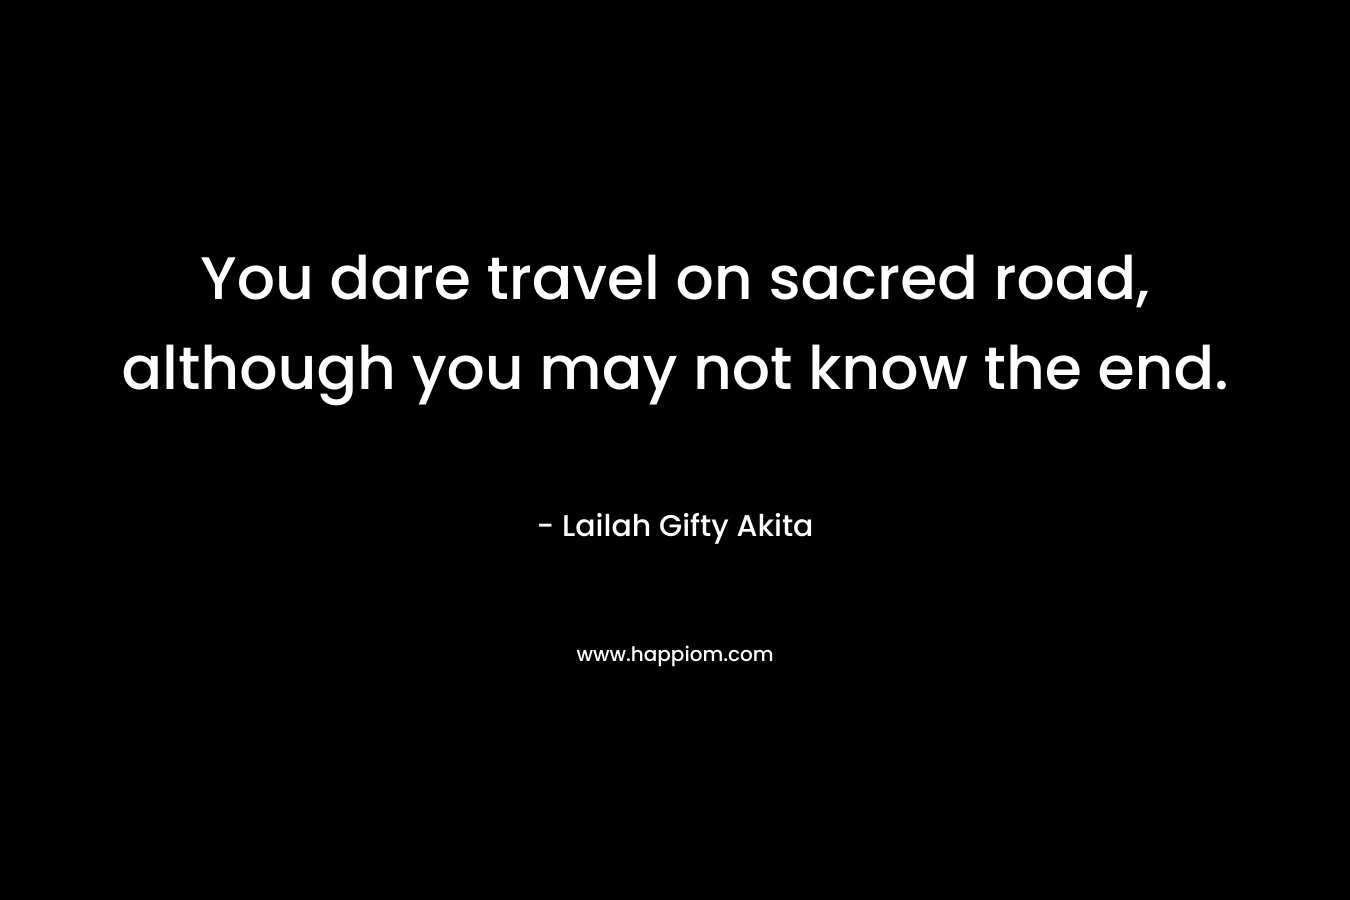 You dare travel on sacred road, although you may not know the end.